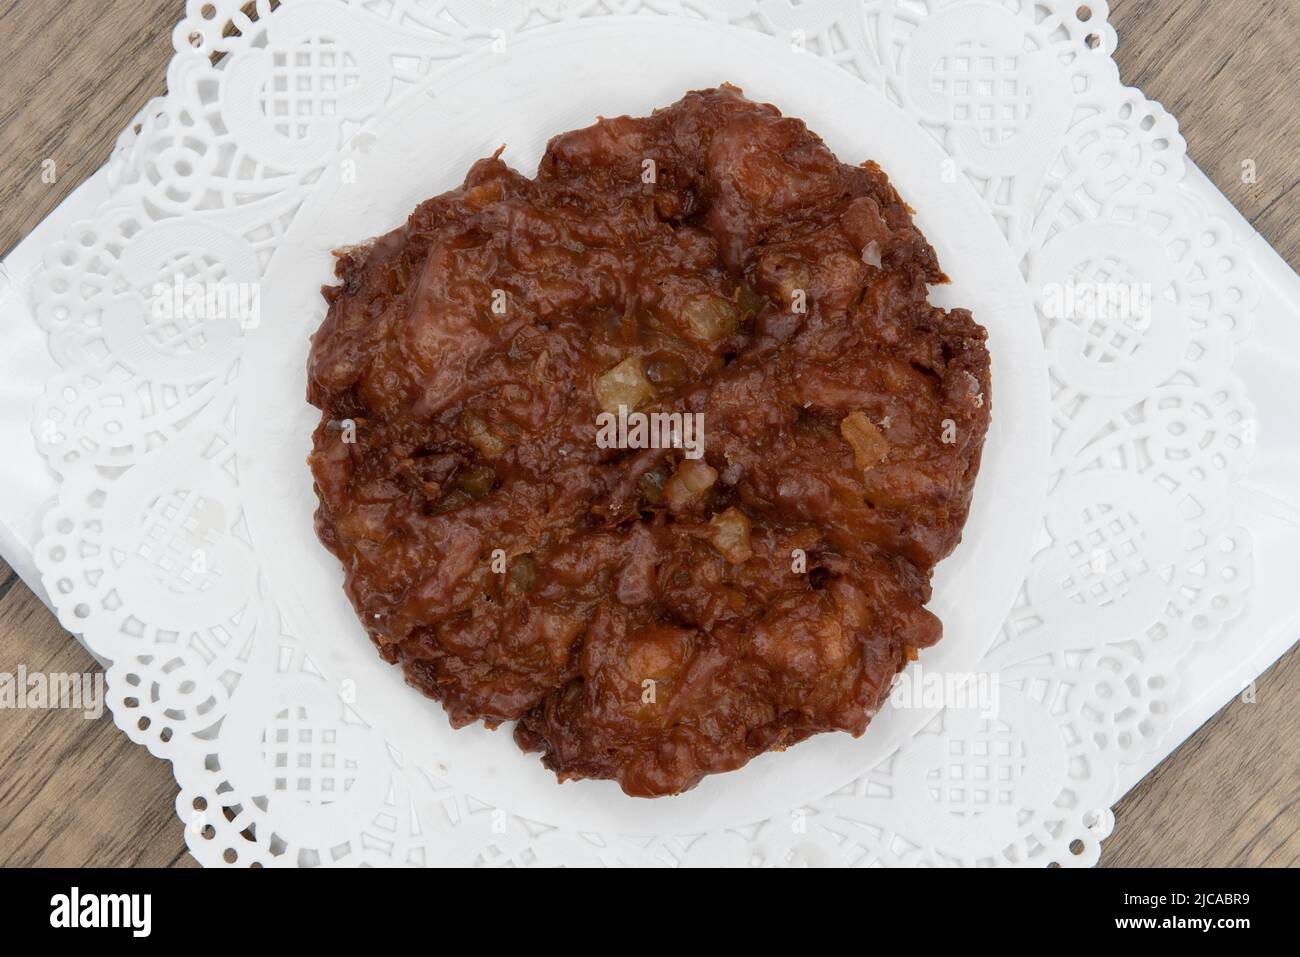 Overhead view of tempting fresh from the oven apple fritter donut from the bakery served on a plate. Stock Photo